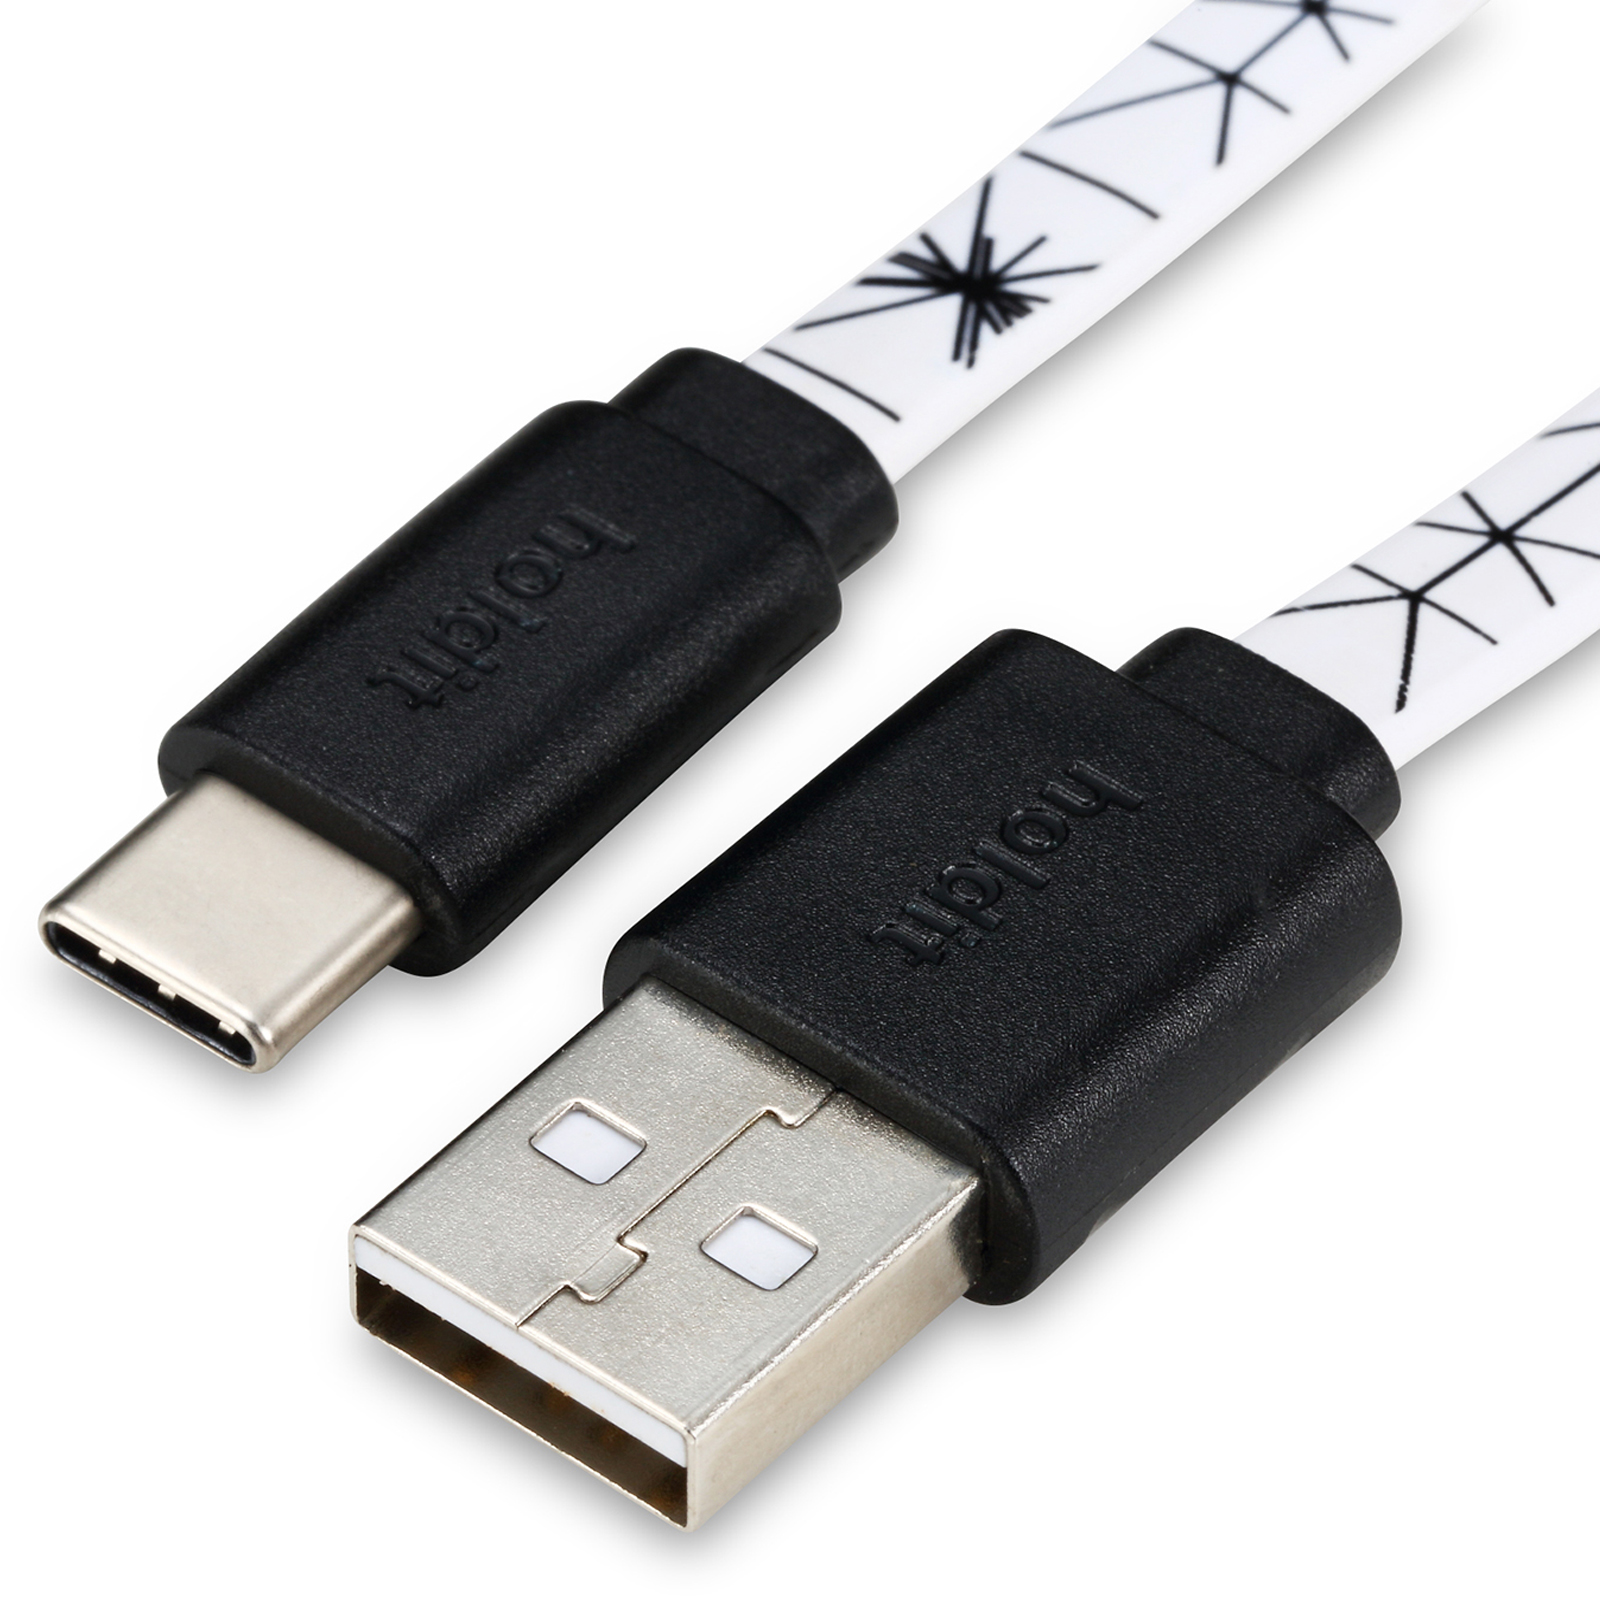 Usb cable, style micro-usb 2m, superstar white